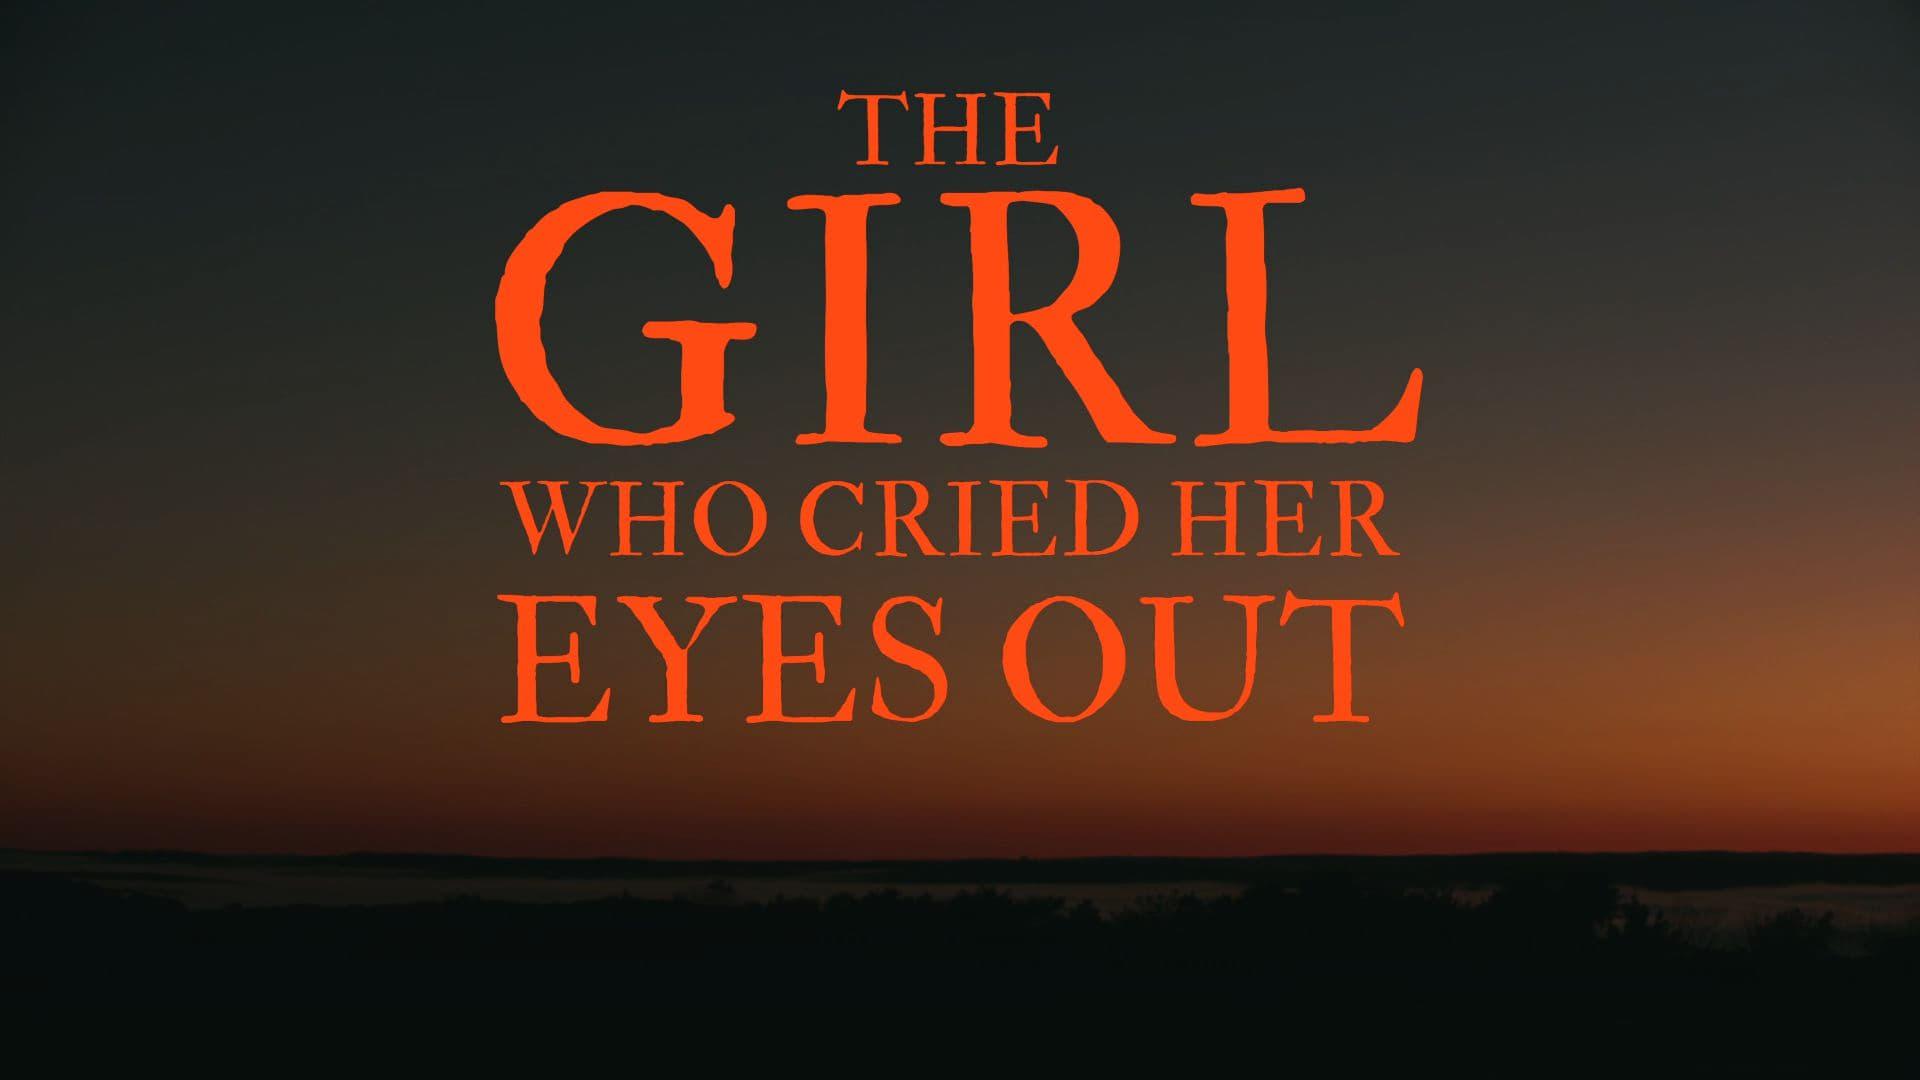 The Girl Who Cried Her Eyes Out backdrop